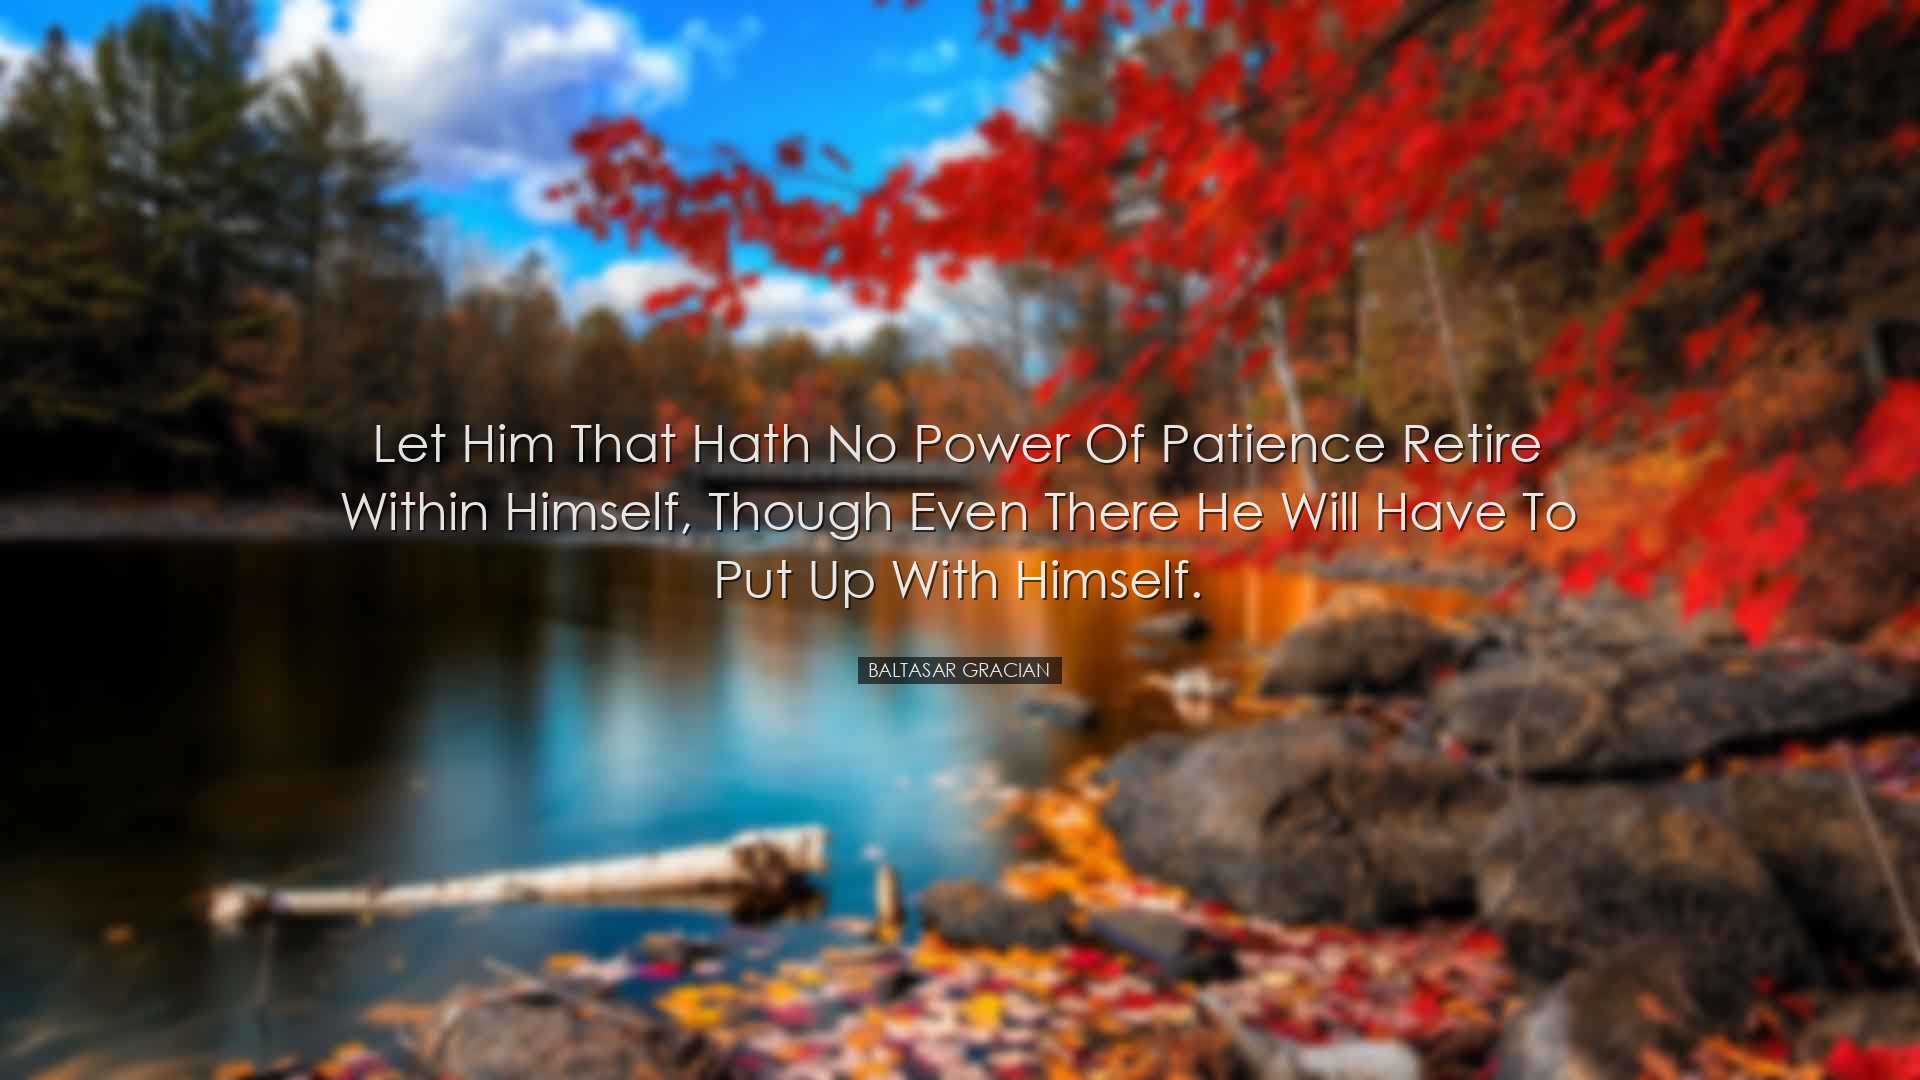 Let him that hath no power of patience retire within himself, thou